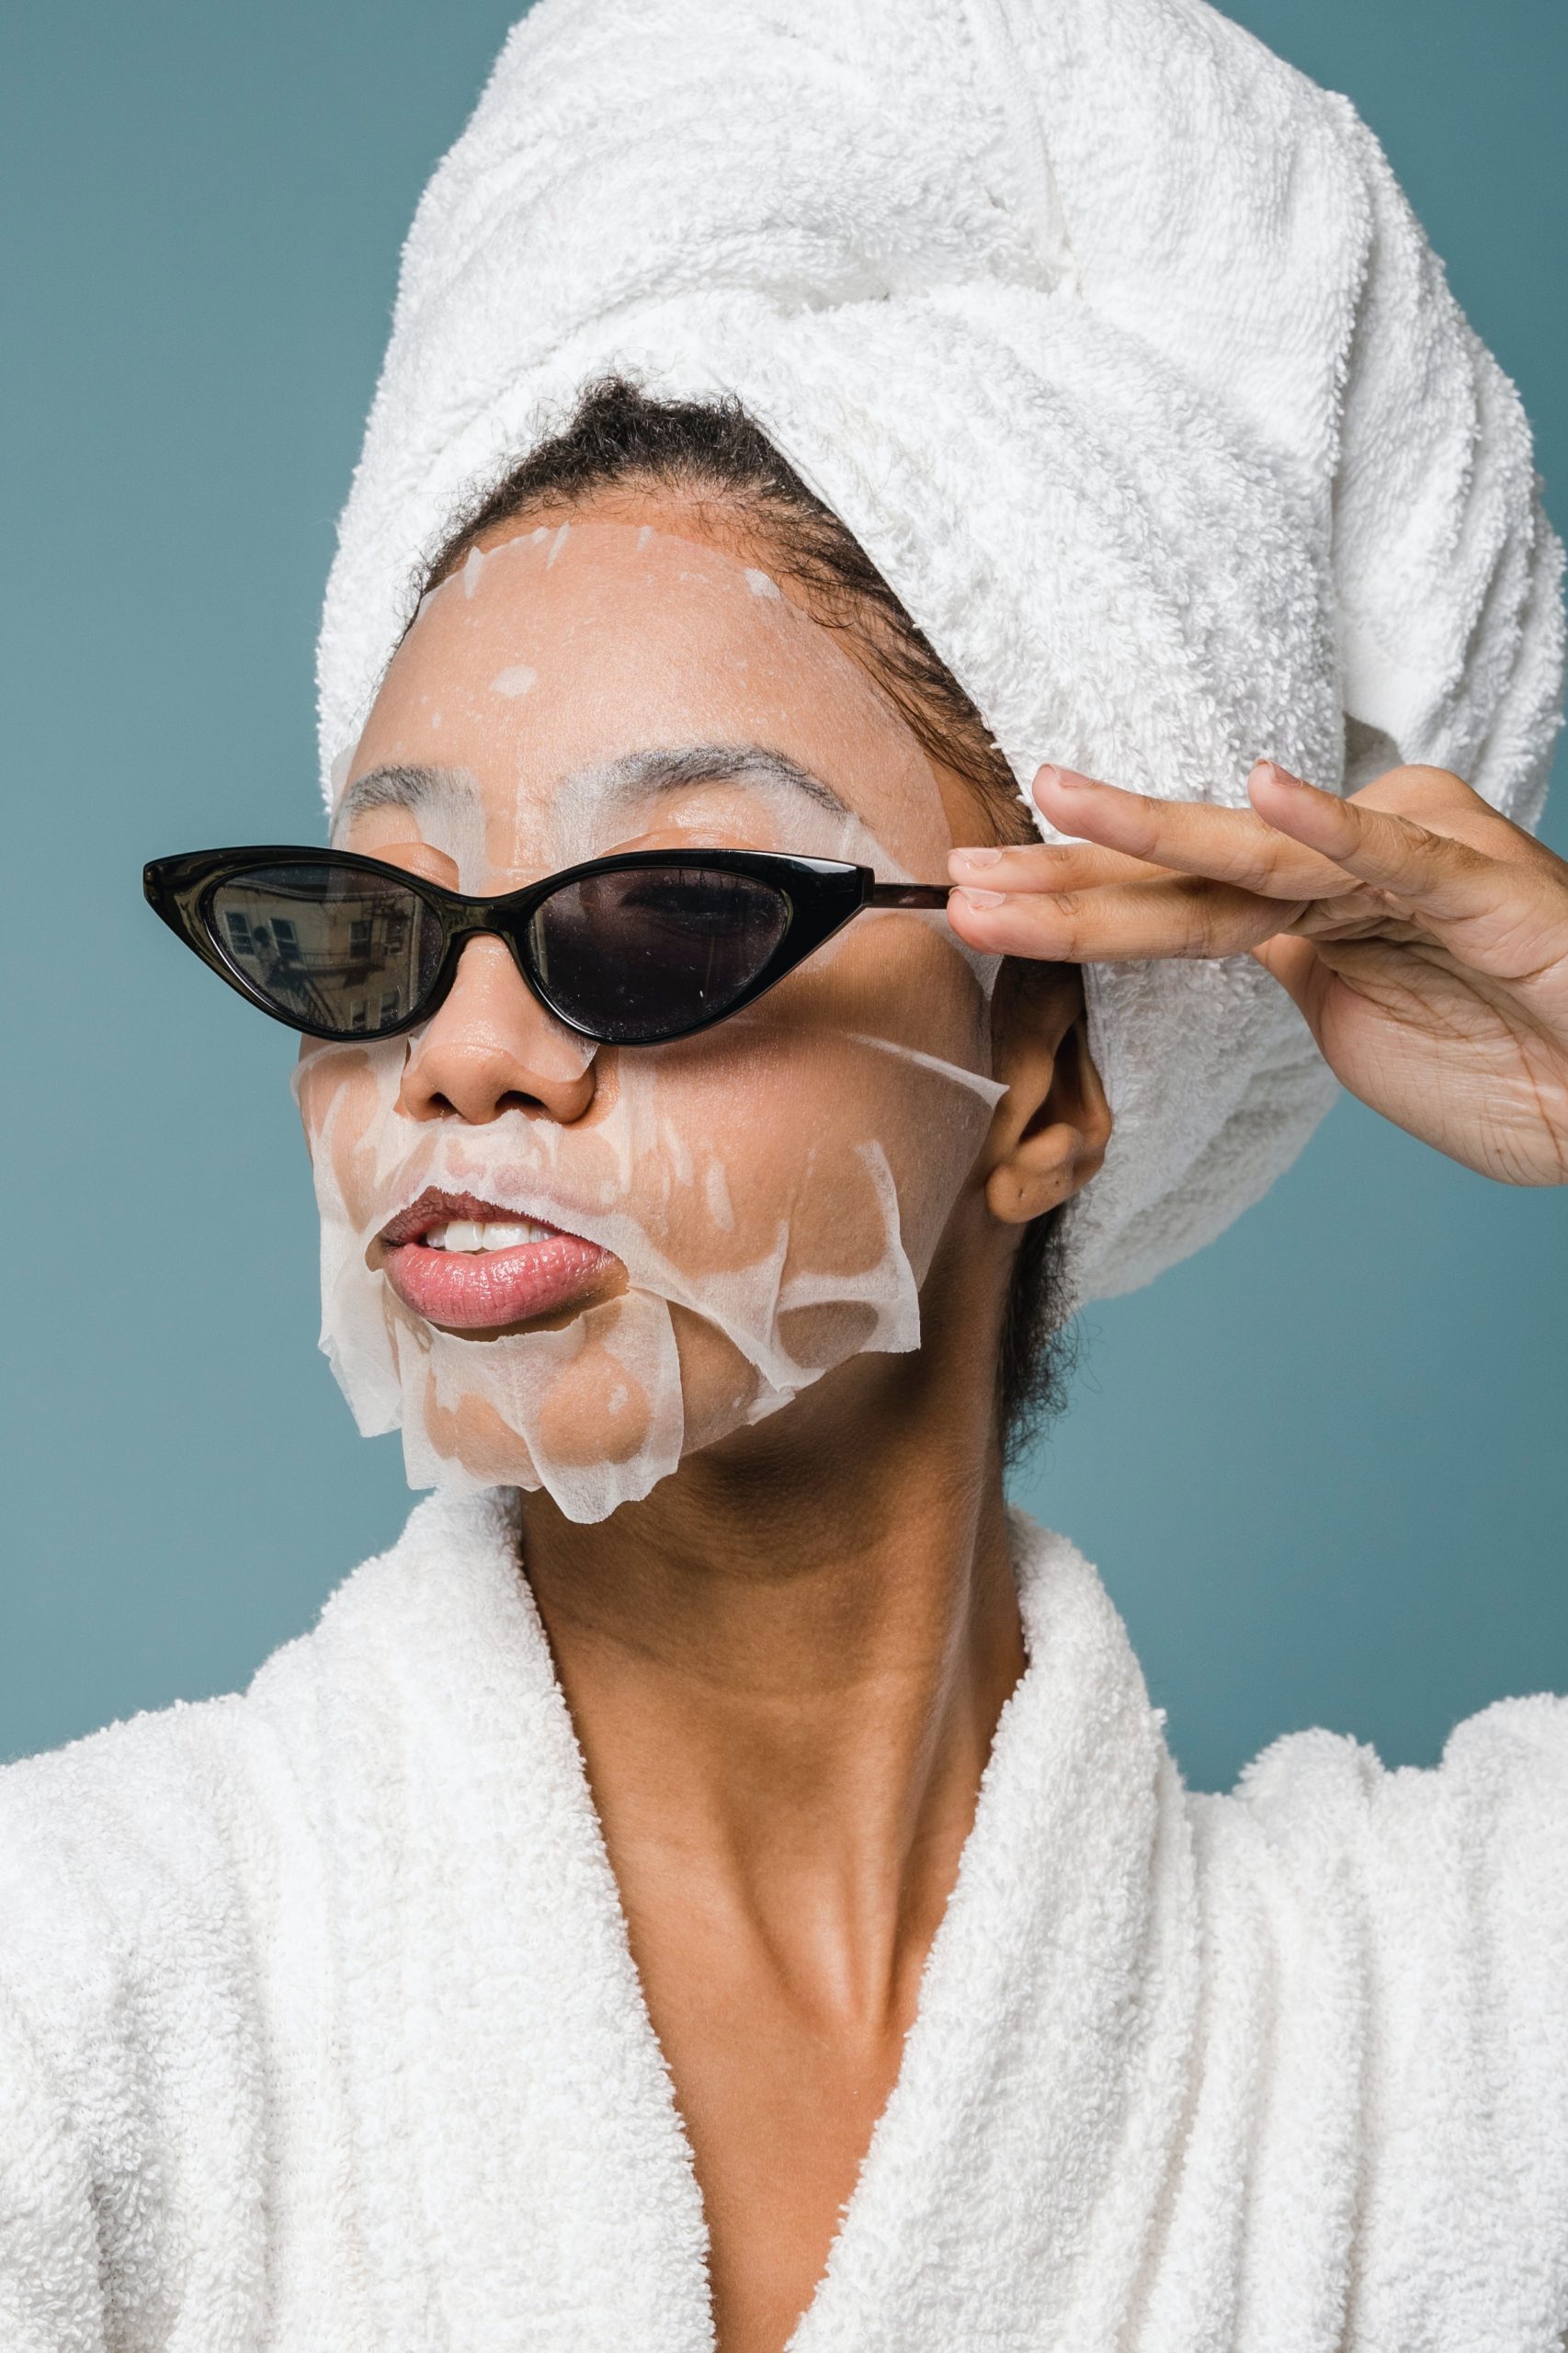 Learn these 5 rules for taking care of your skin in hot weather